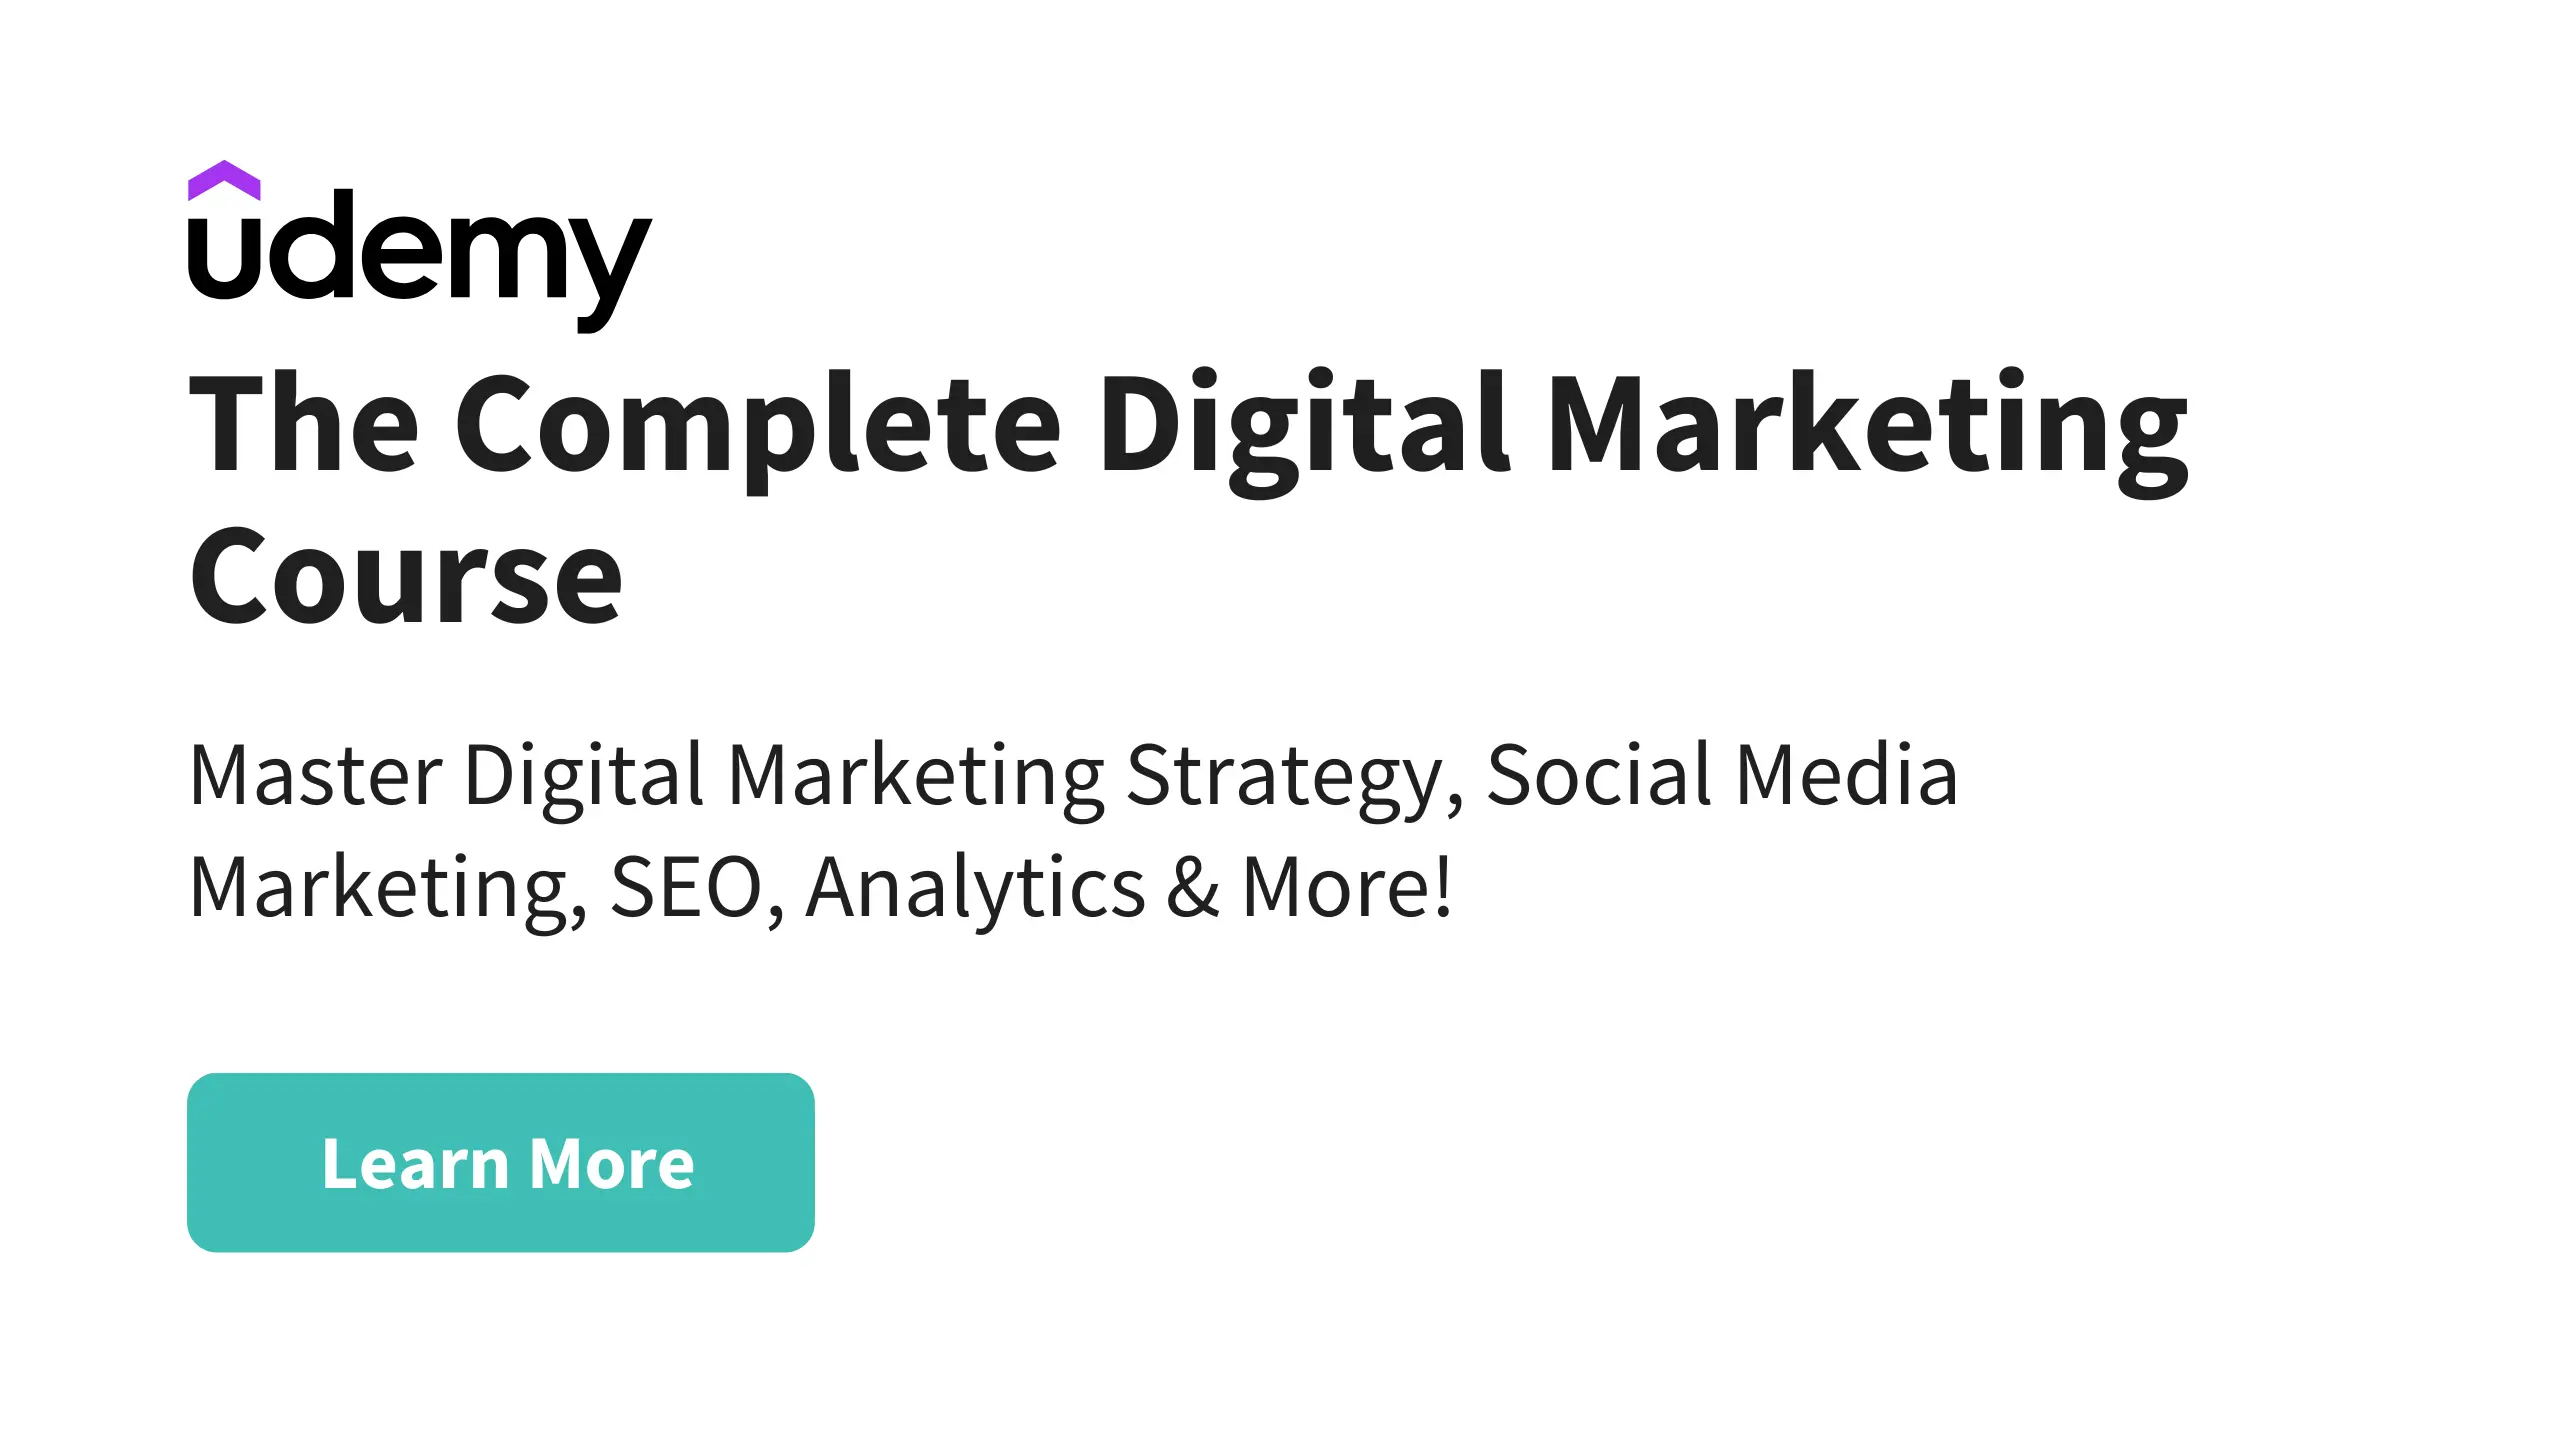 Udemy - The Complete Digital Marketing Course